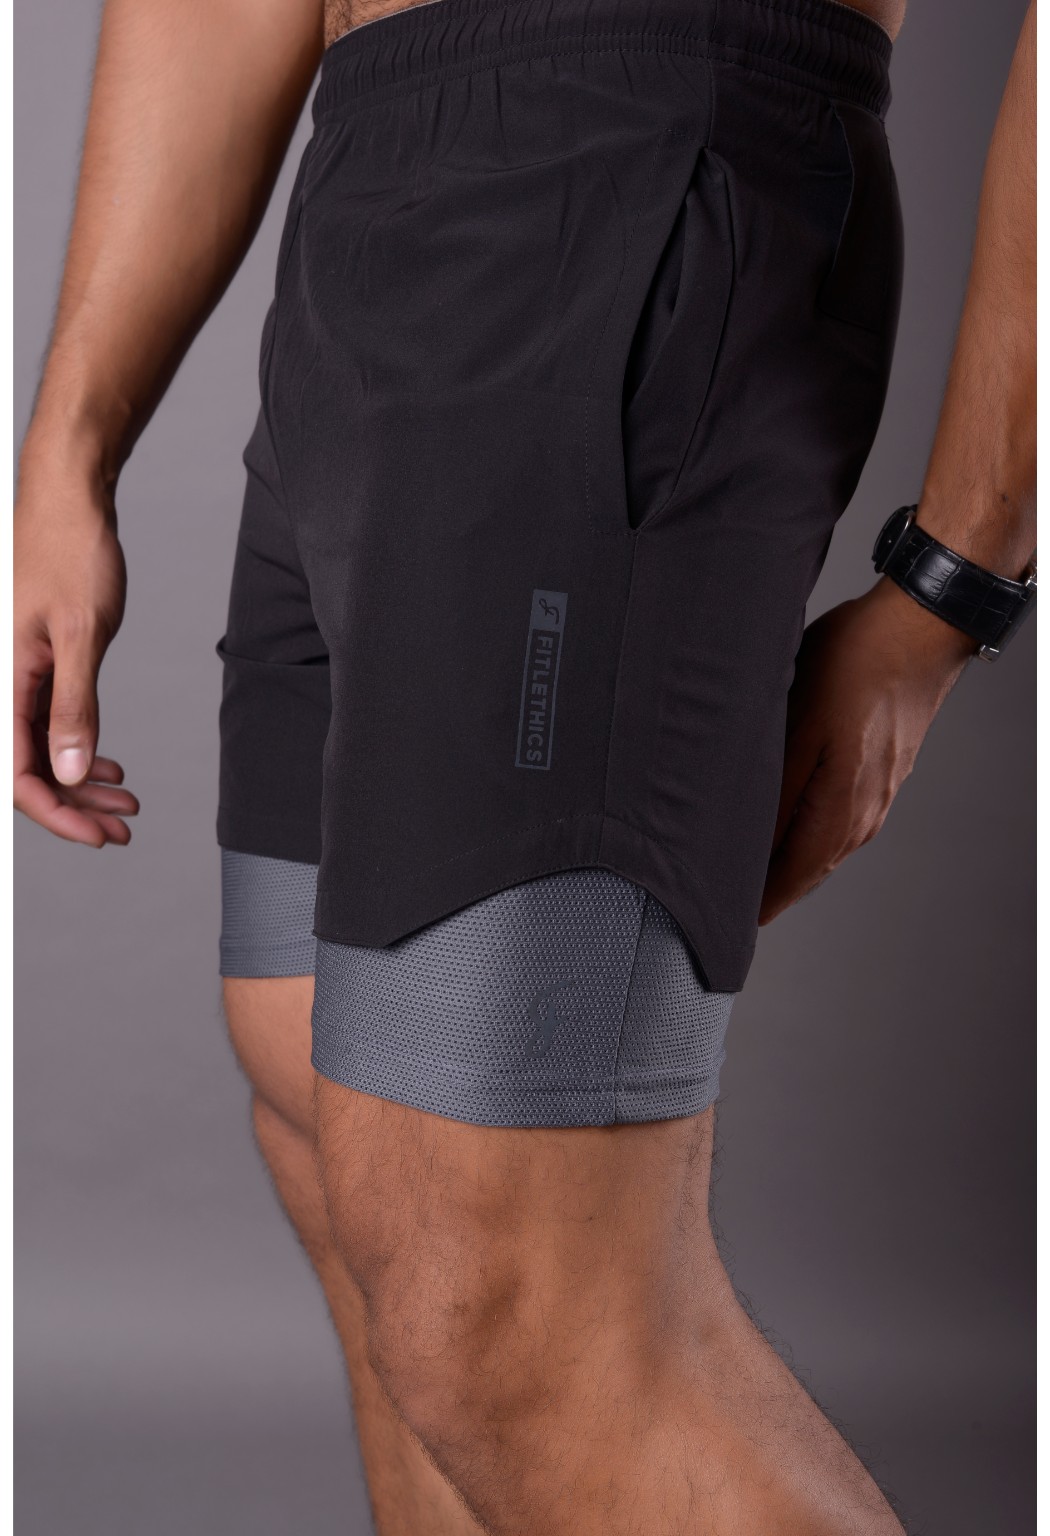 AE, Limitless 2-in-1 Shorts - Taupe, Gym Shorts Men